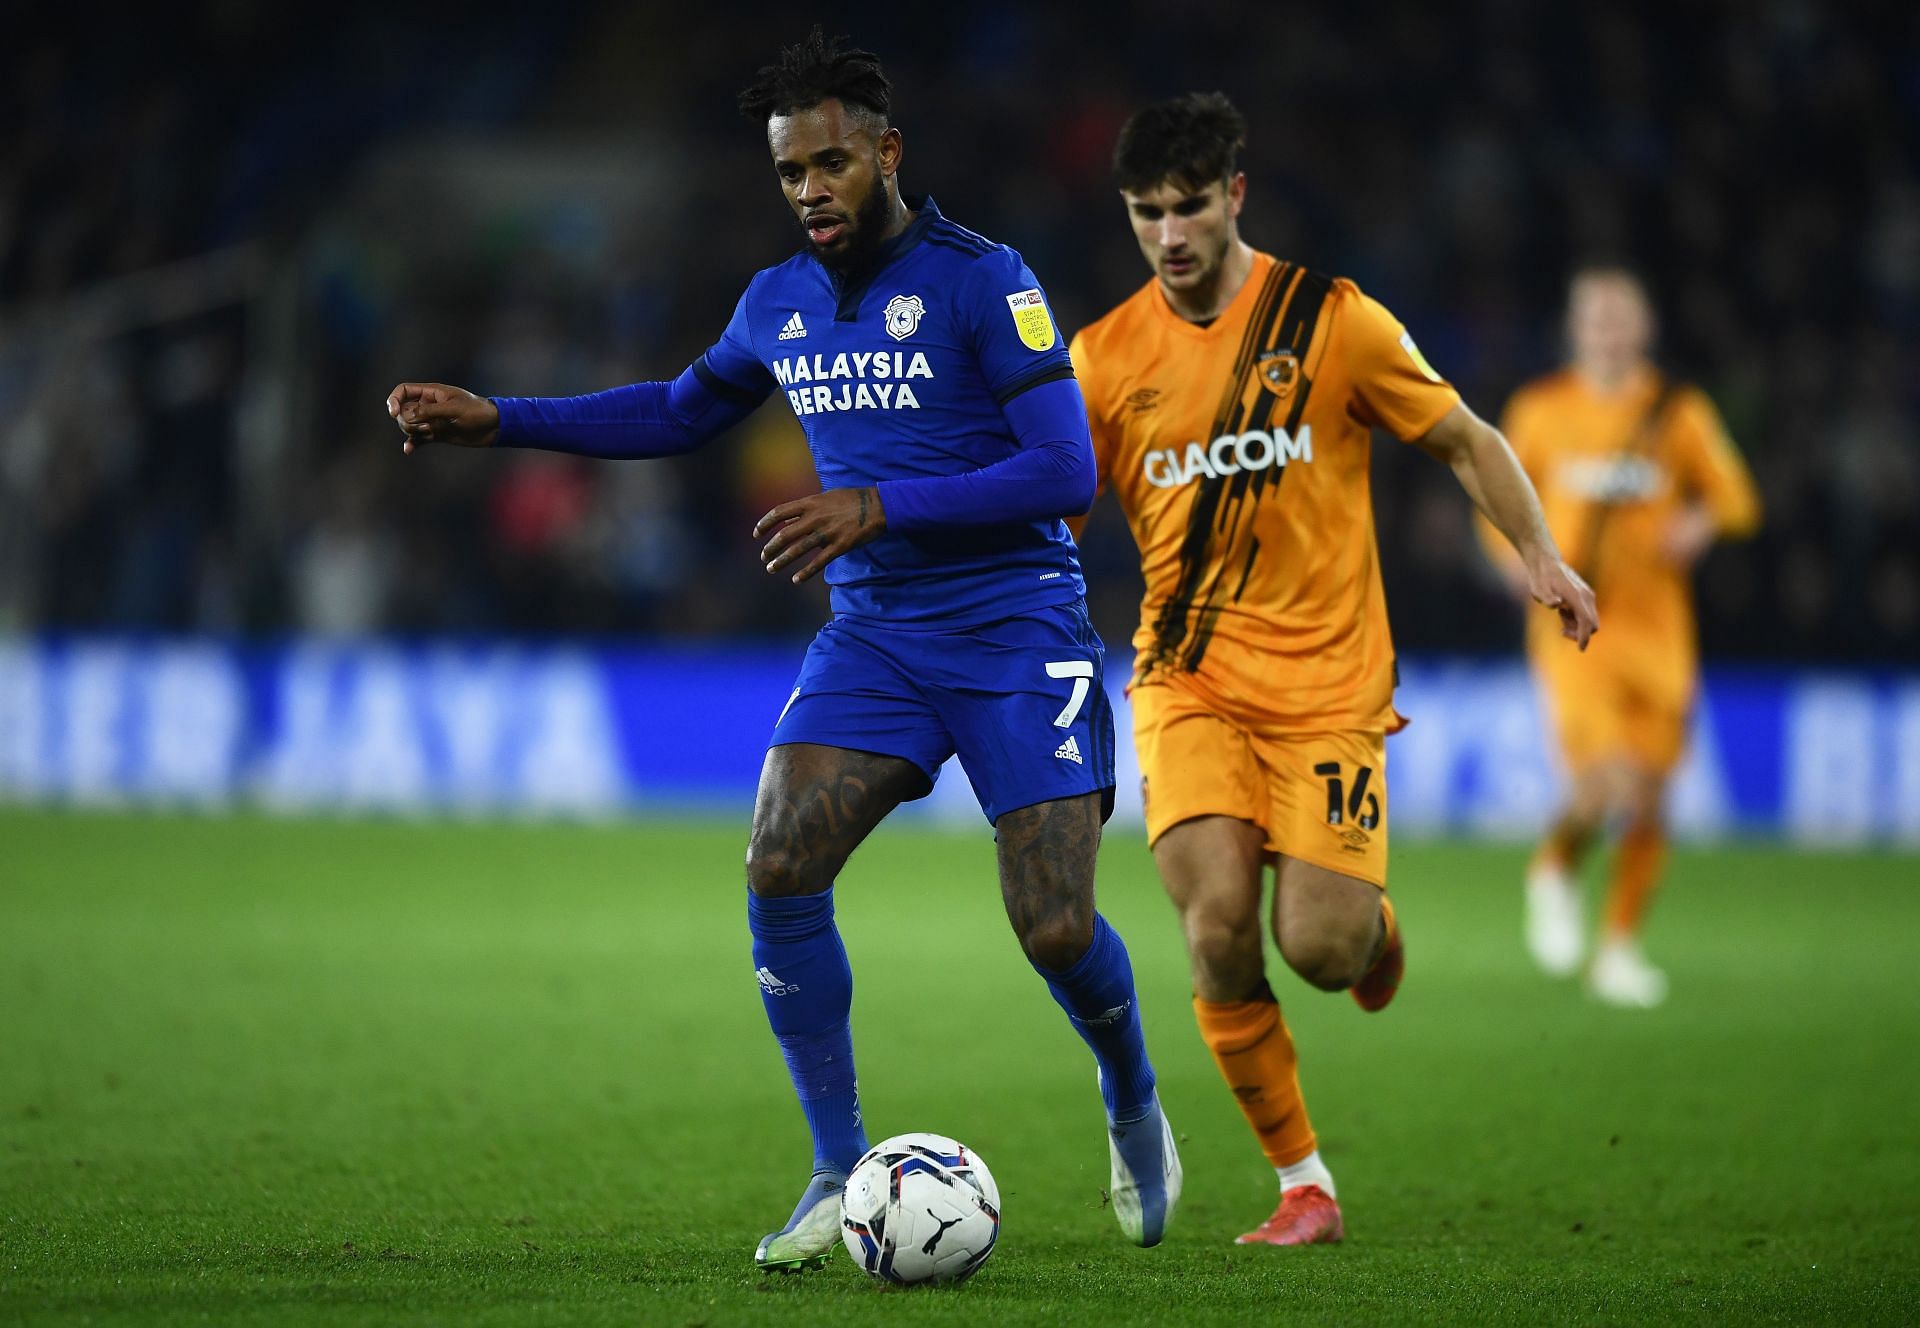 Bacuna will be missing for Cardiff City